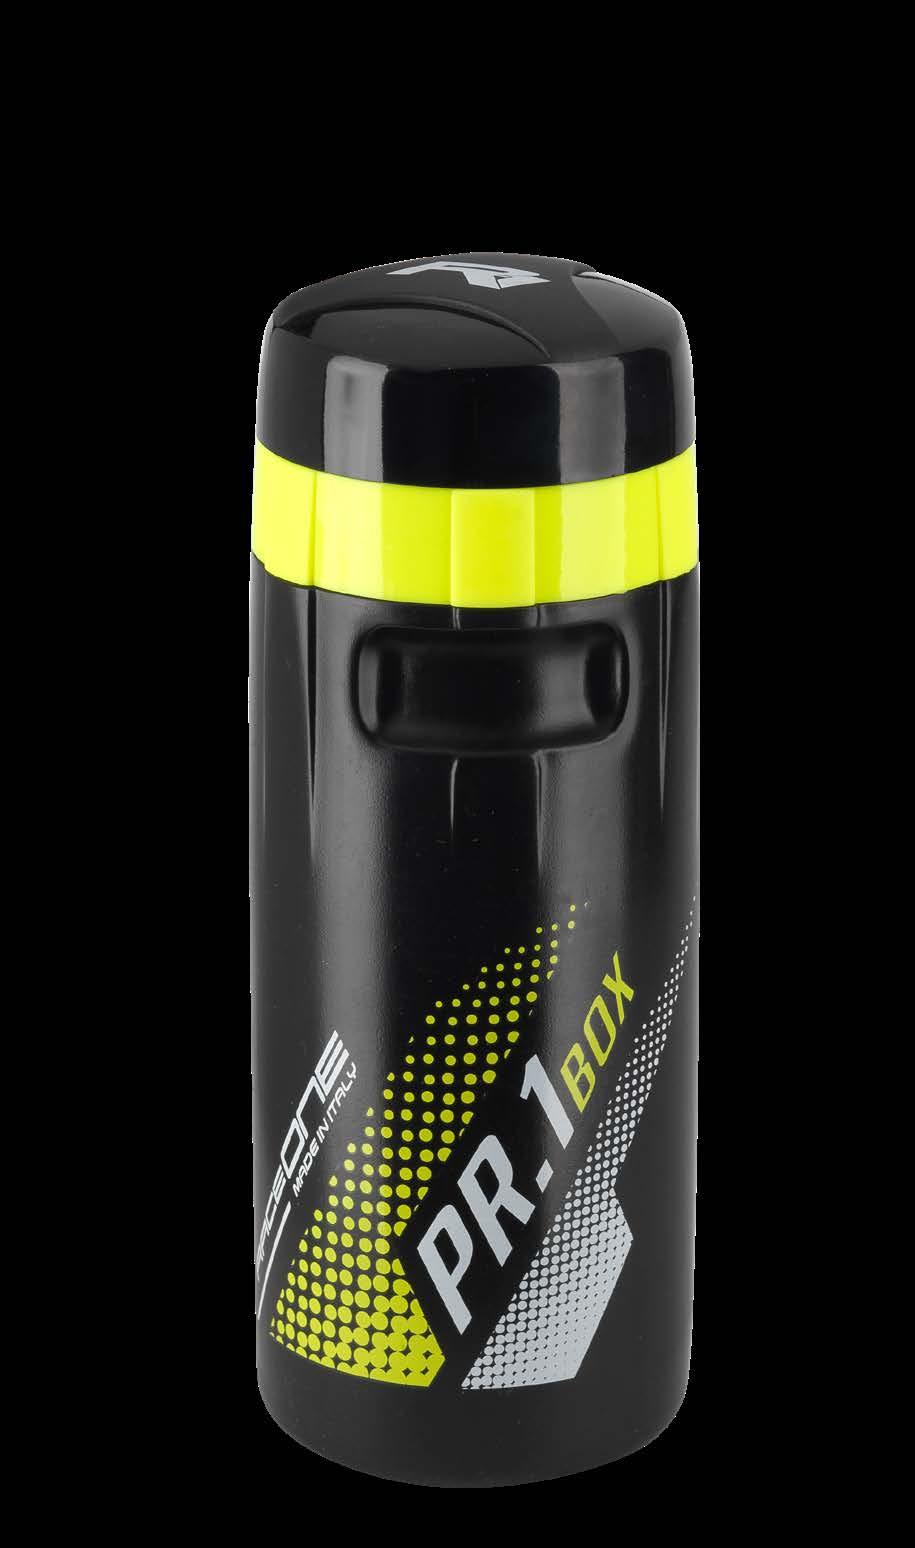 The new Bottle Toolbox PR.1 Raceone proves to have high capacity, flexibility and design; this convinced many professional teams to use it.